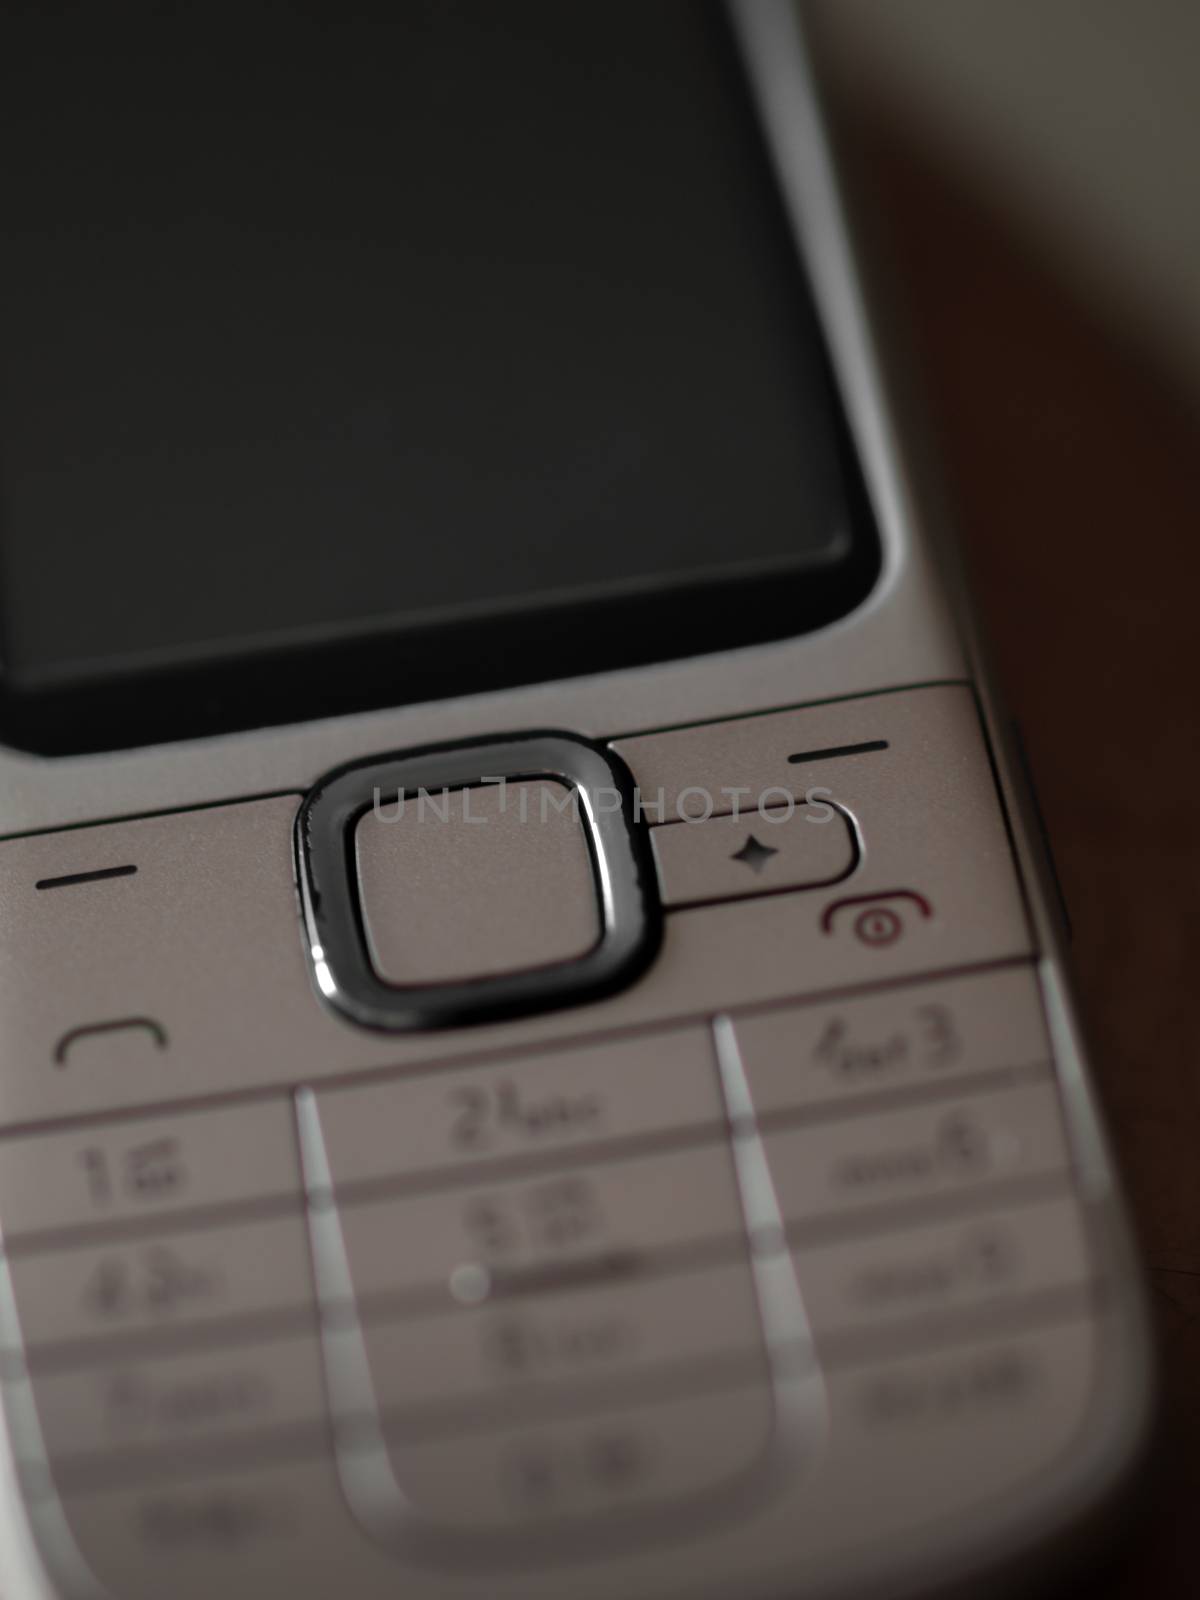 COLOR PHOTO OF MOBILE PHONE KEYPAD